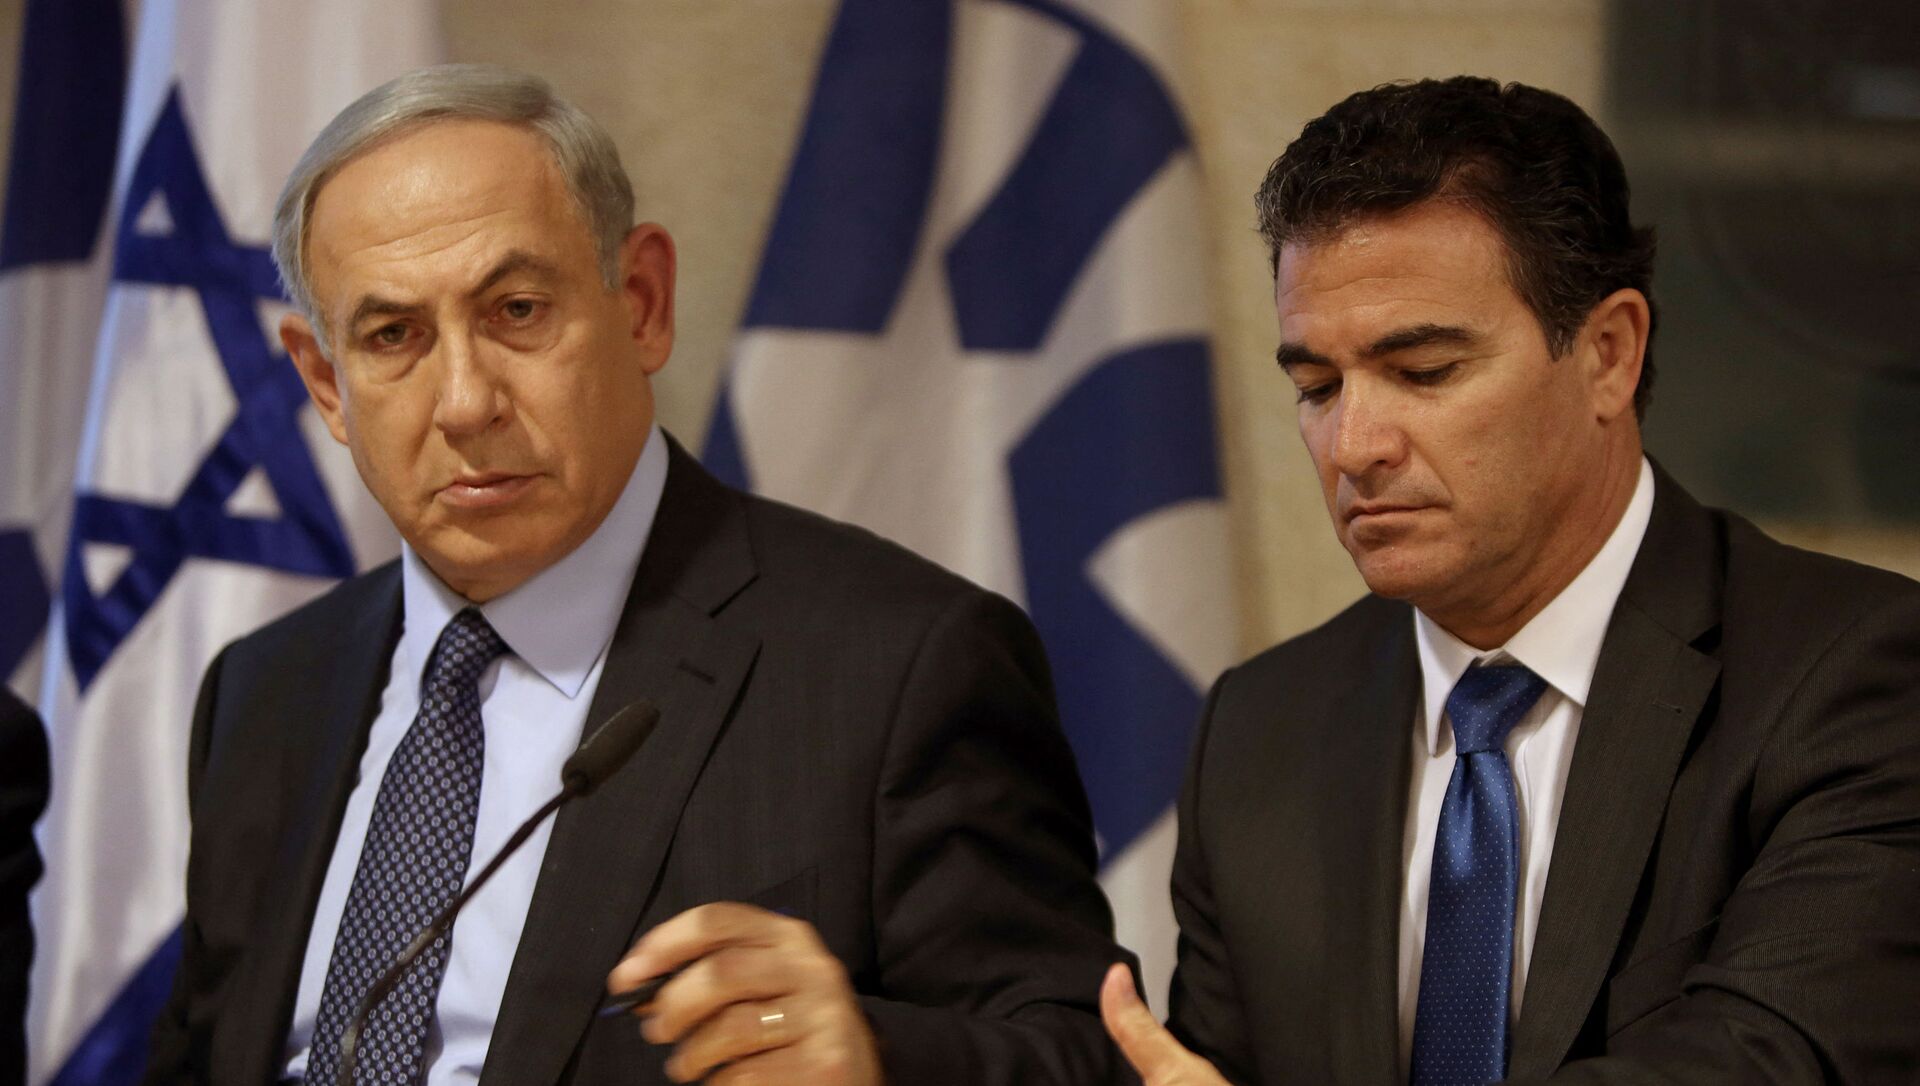 A file picture taken at the Israeli foreign ministry on October 15, 2015, shows Prime Minister Benjamin Netanyahu (L) sitting next to Yossi Cohen, who is currently the head of Israel's National Security Council, and who was named as the 12th head of the Mossad intelligence agency by Netanyahu on December 7, 2015. - Sputnik International, 1920, 12.06.2021